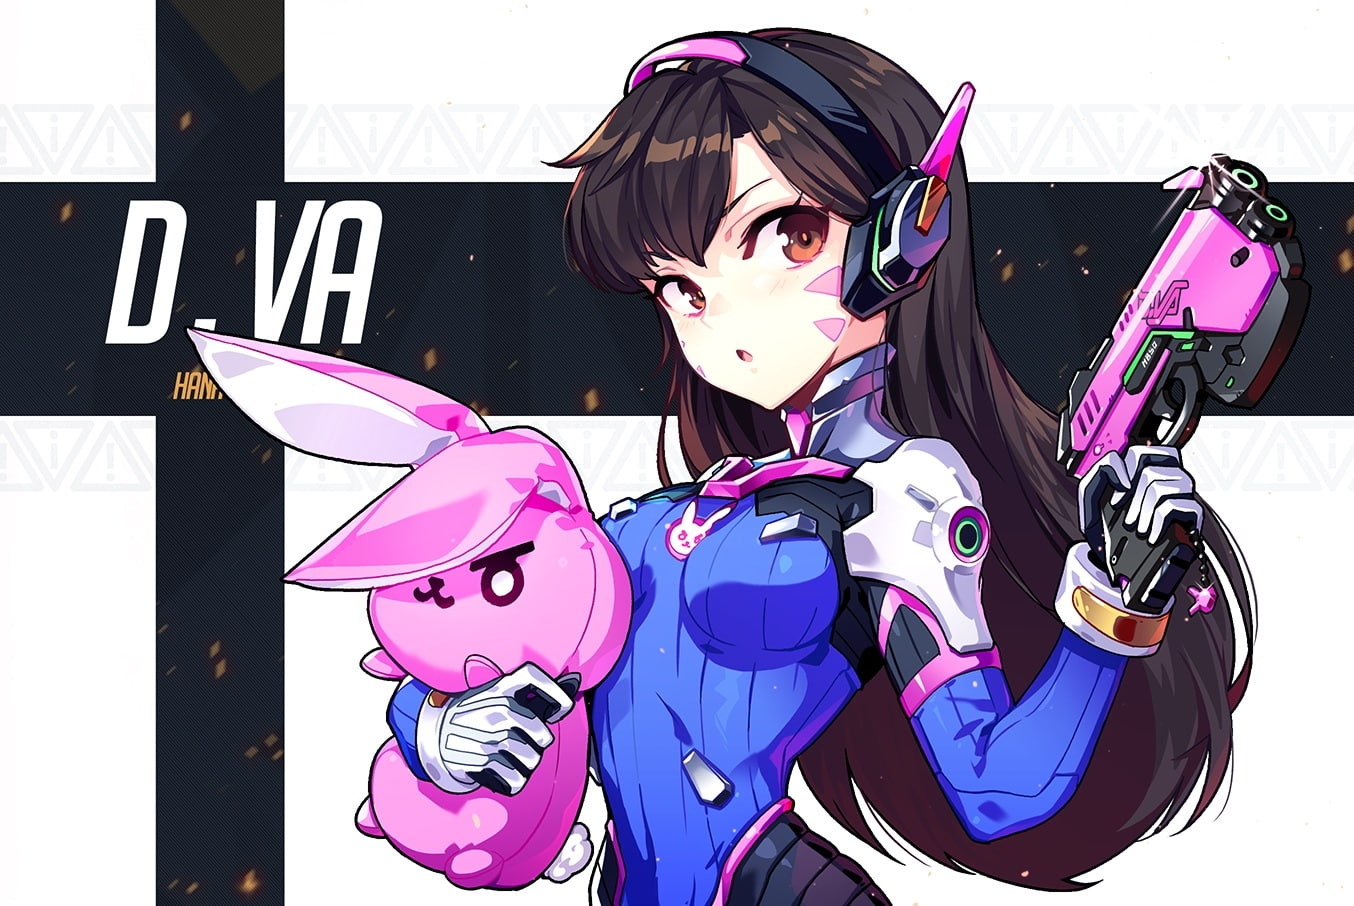 overwatch, d.va gun, anime style, Games, real people, one person